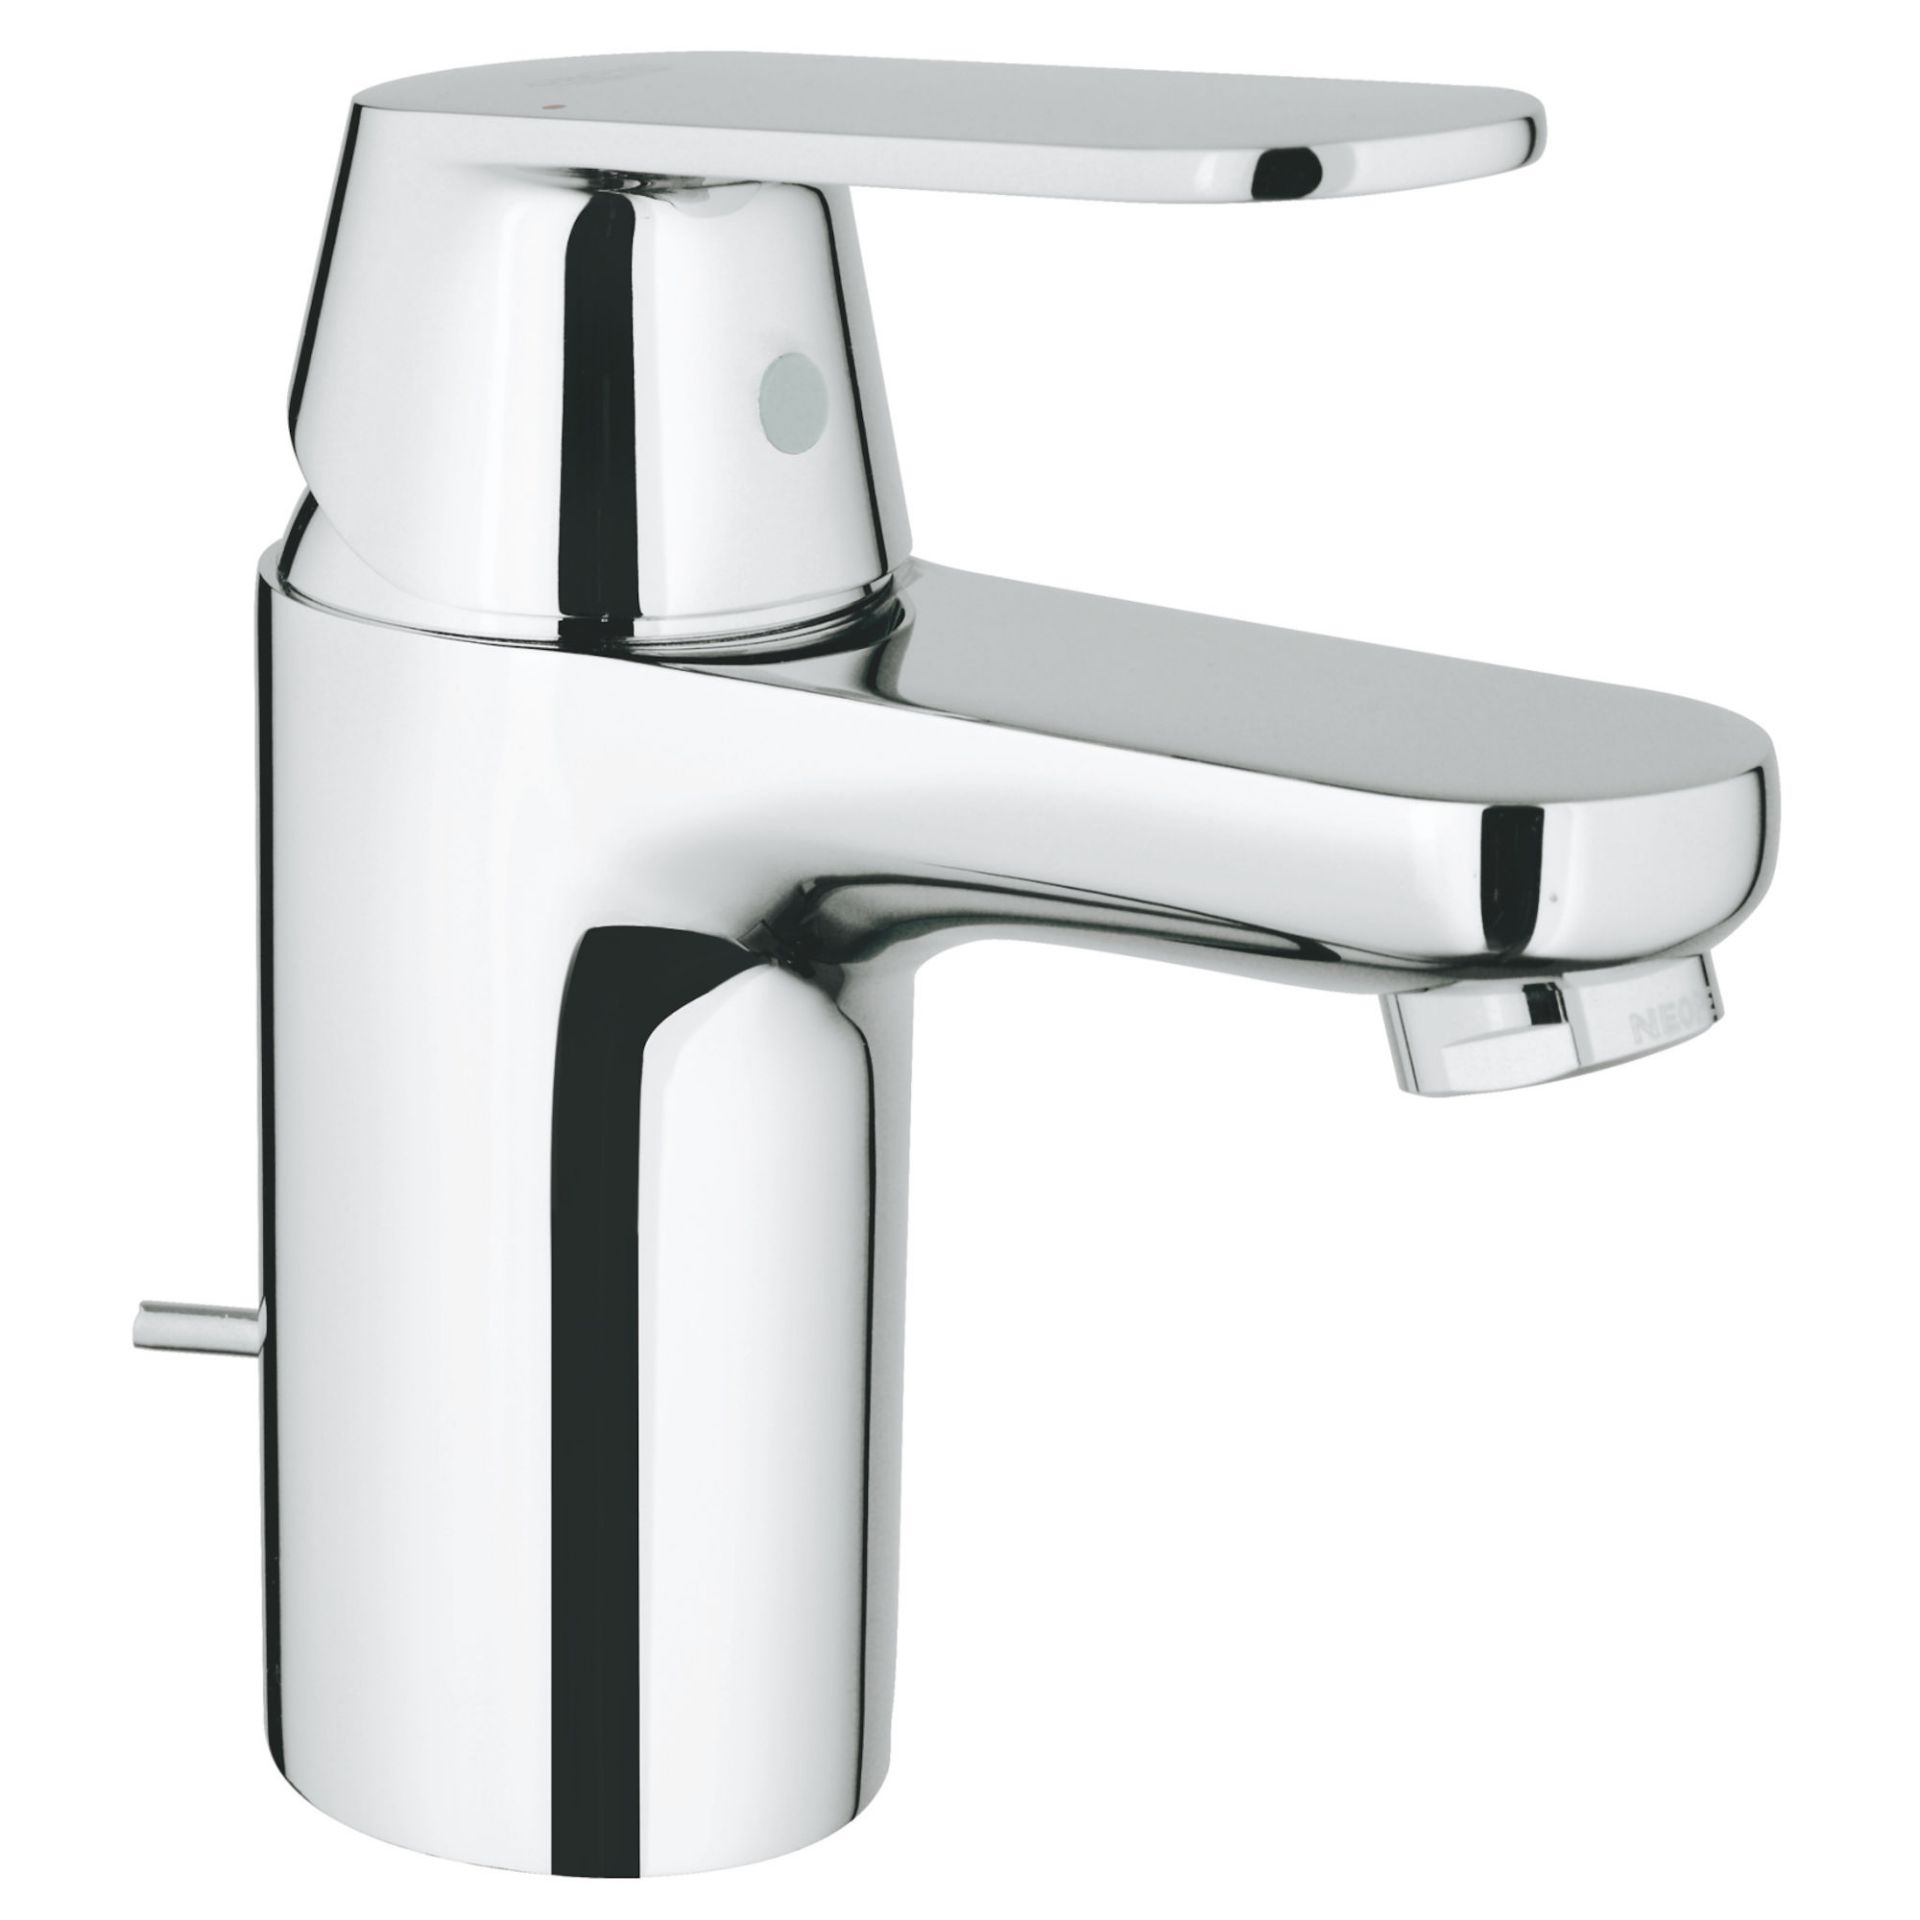 (HP248) Grohe Eurosmart Cosmopolitan Basin Mixer Tap with Pop-up Waste. Comfortable standard- - Image 2 of 2